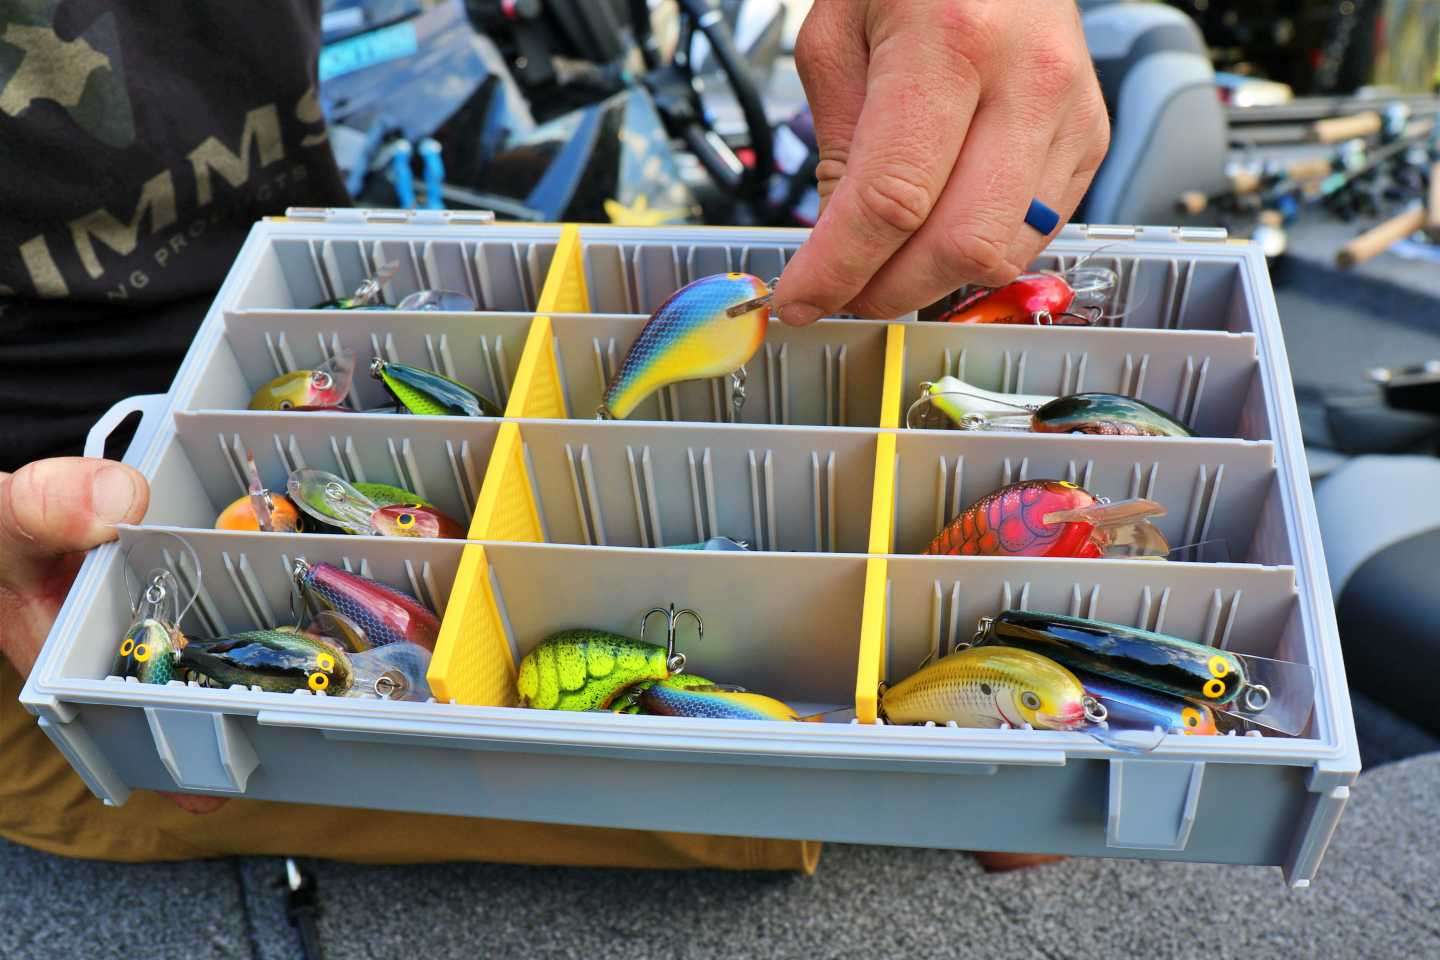 6 Easy Ways to Optimize Your Shop or Fishing Tackle Storage Space